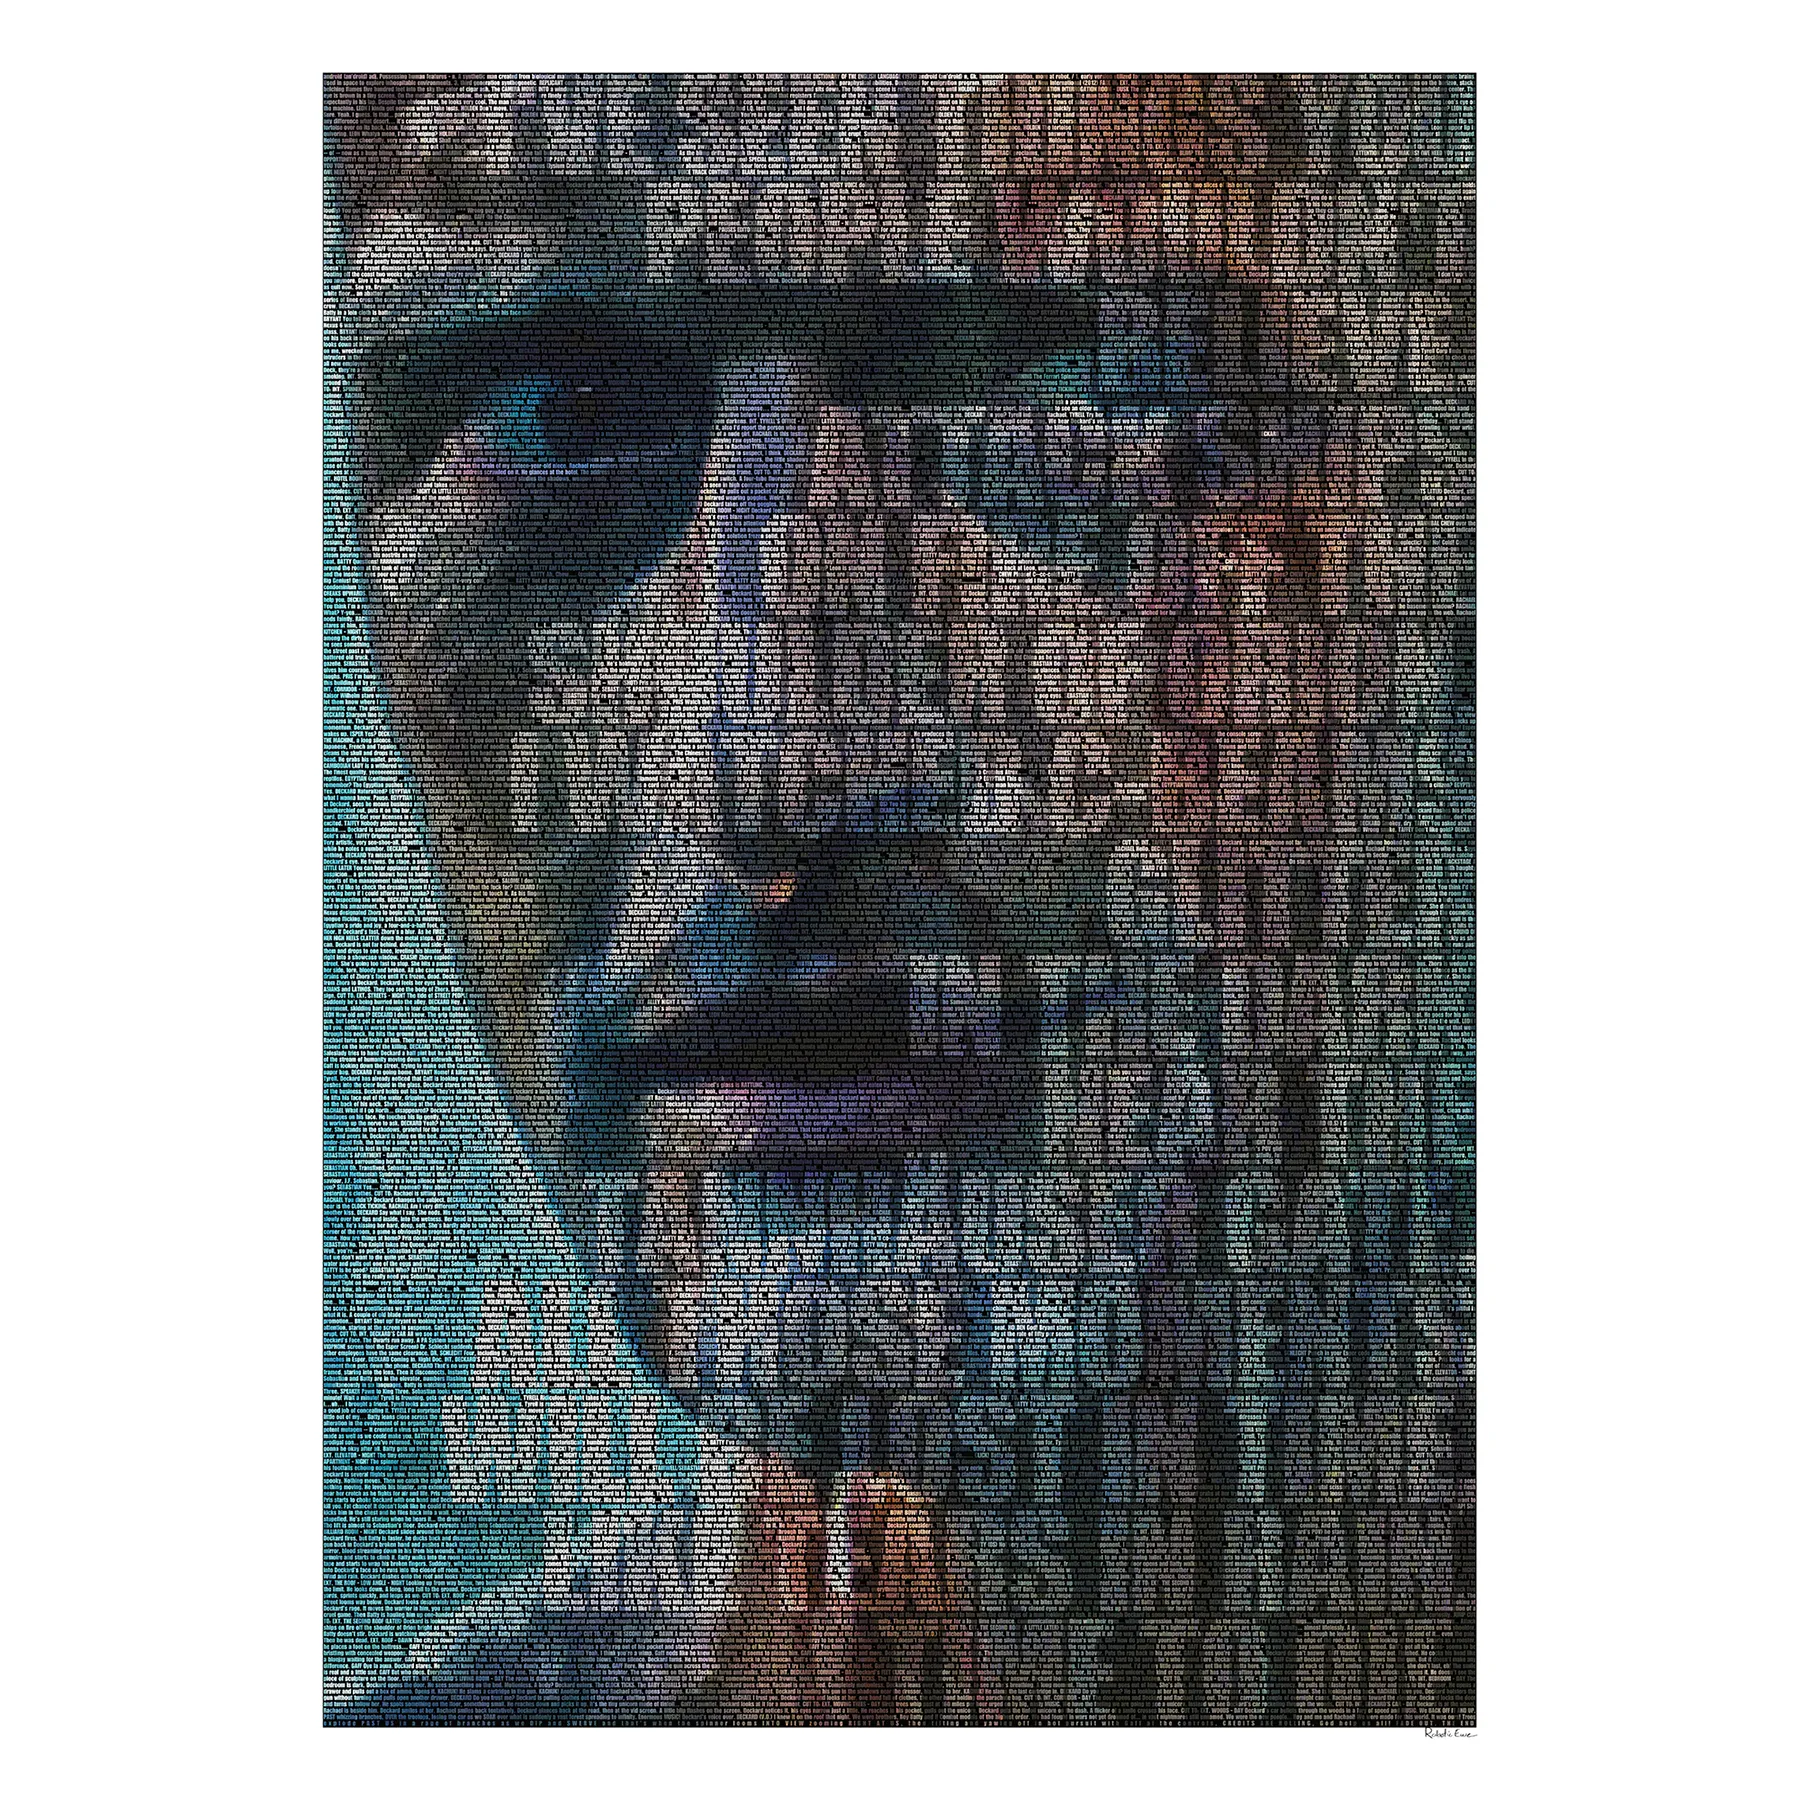 A portrait of Blade Runner's Roy Batty, featuring the Tears in Rain Monologue.